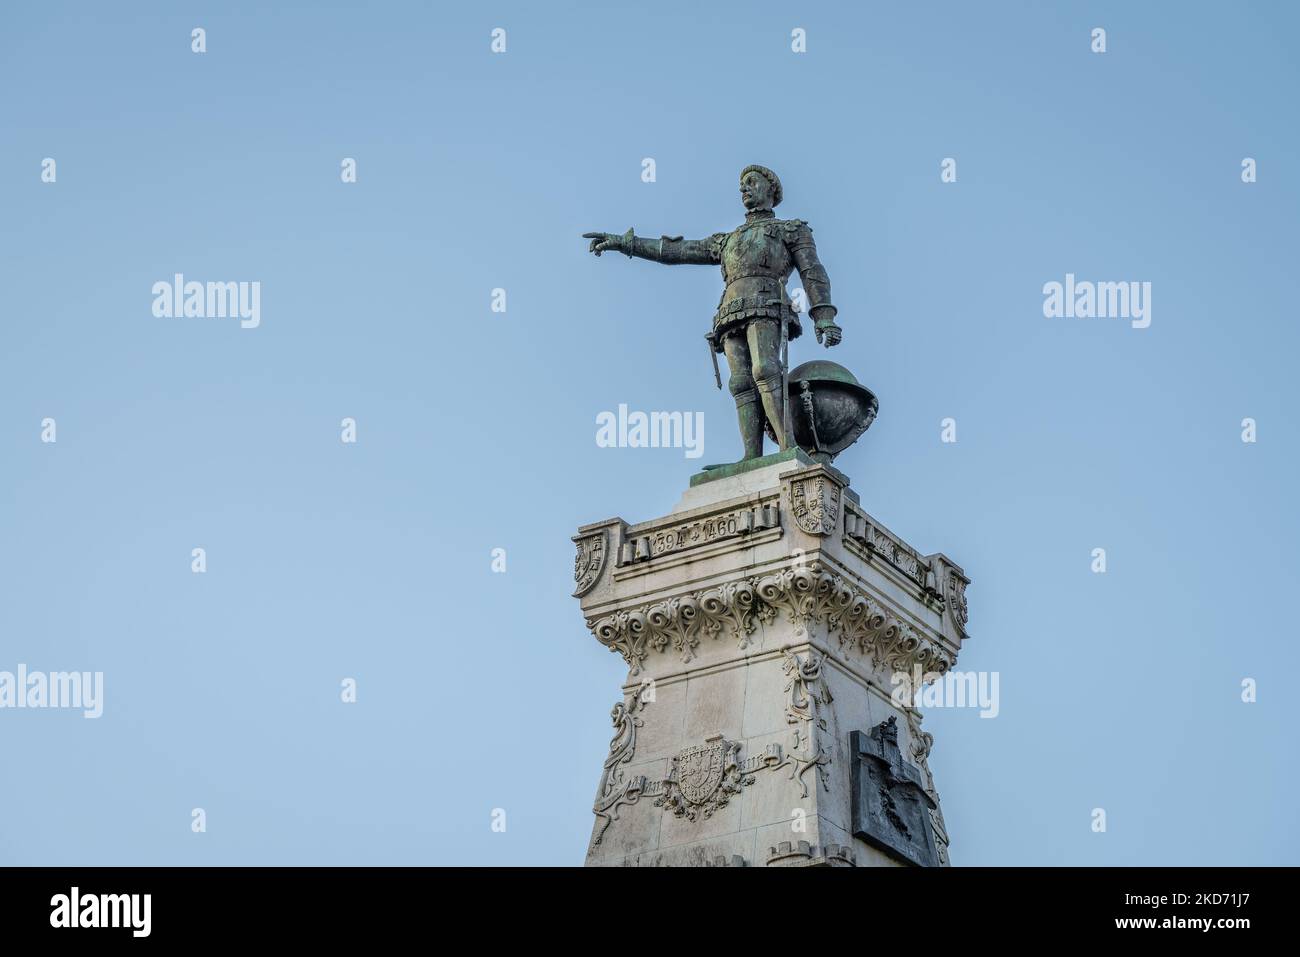 Monument to Prince Henry the Navigator at Infante D. Henrique Square - Porto, Portugal Stock Photo